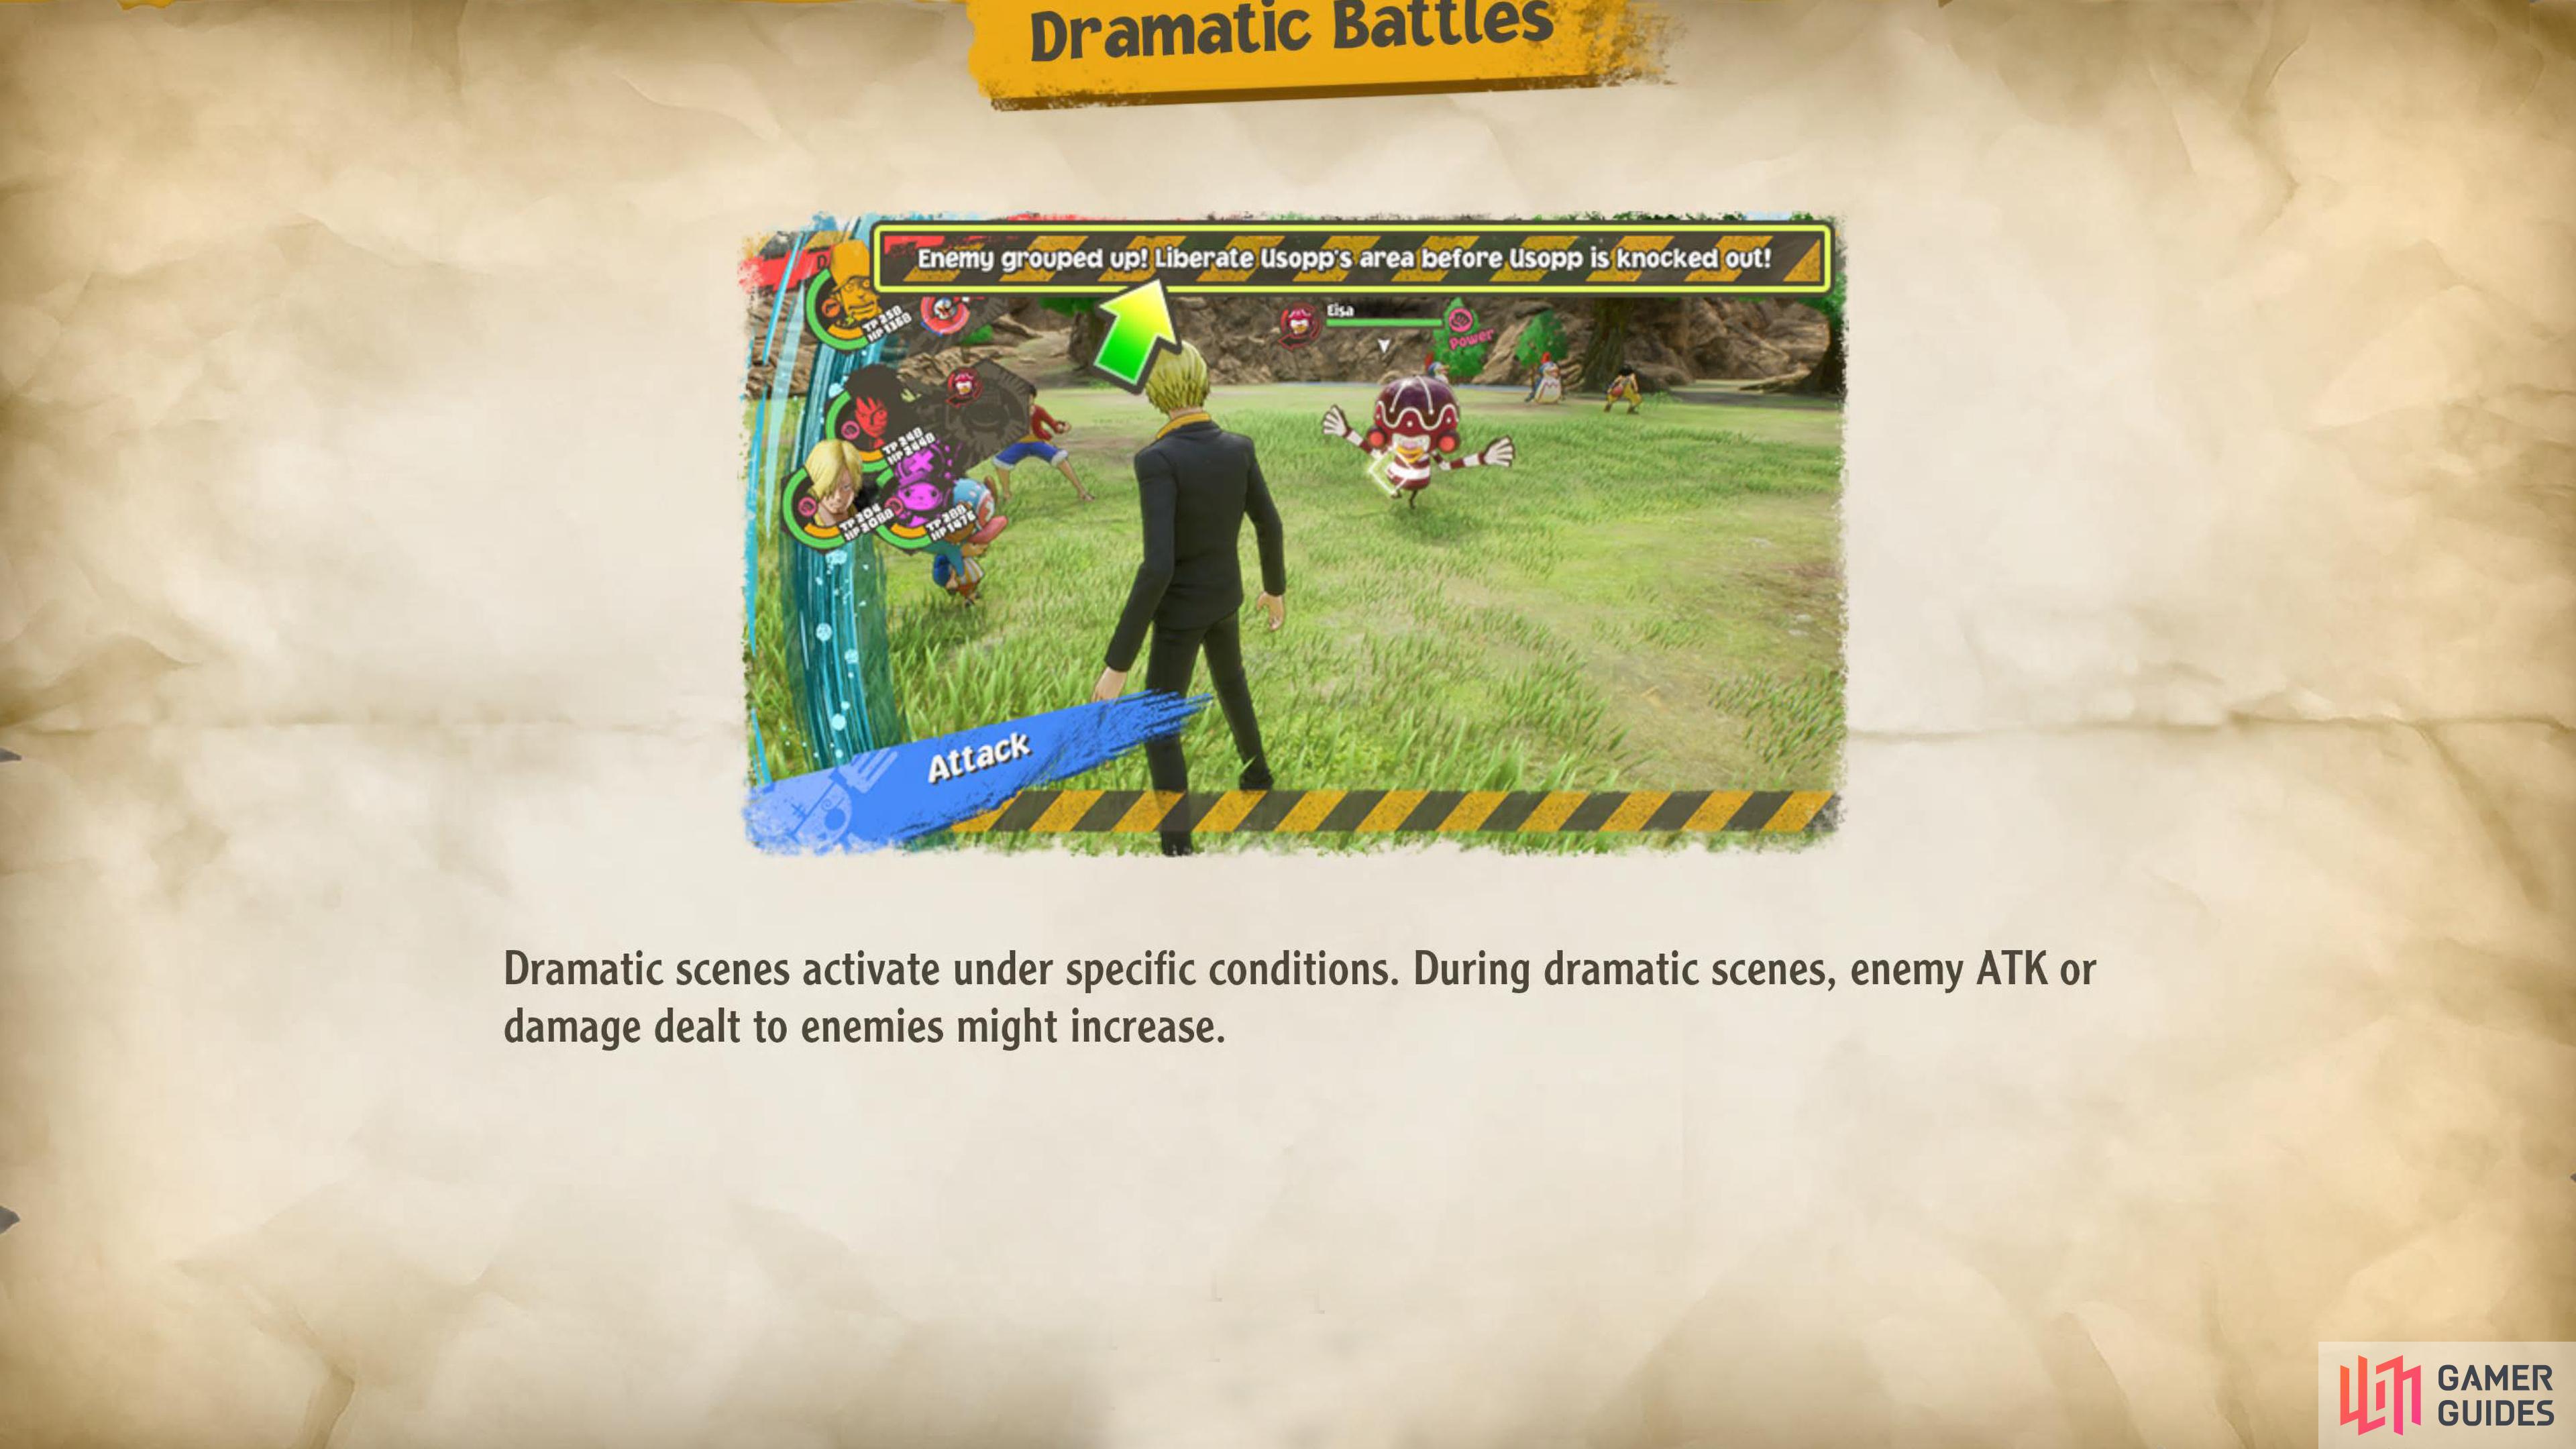 Dramatic Battles will reward you more EXP for completing small battle-related tasks.